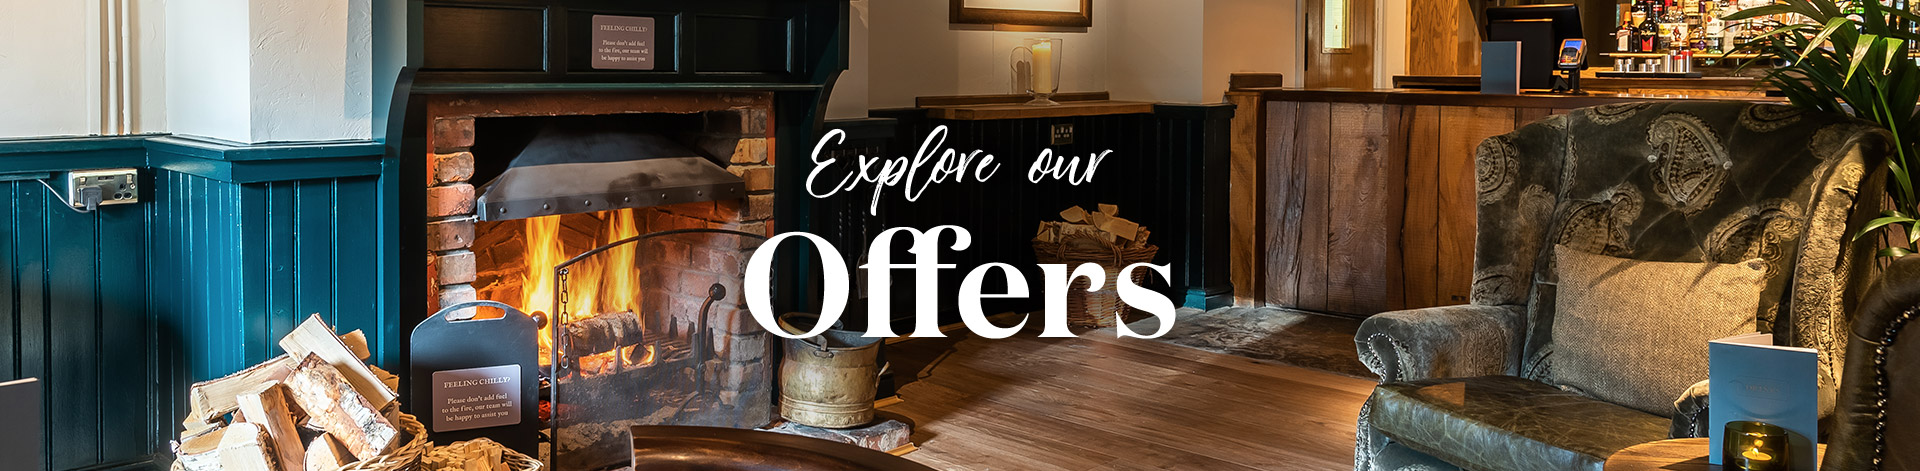 Our latest offers at The Brassmill